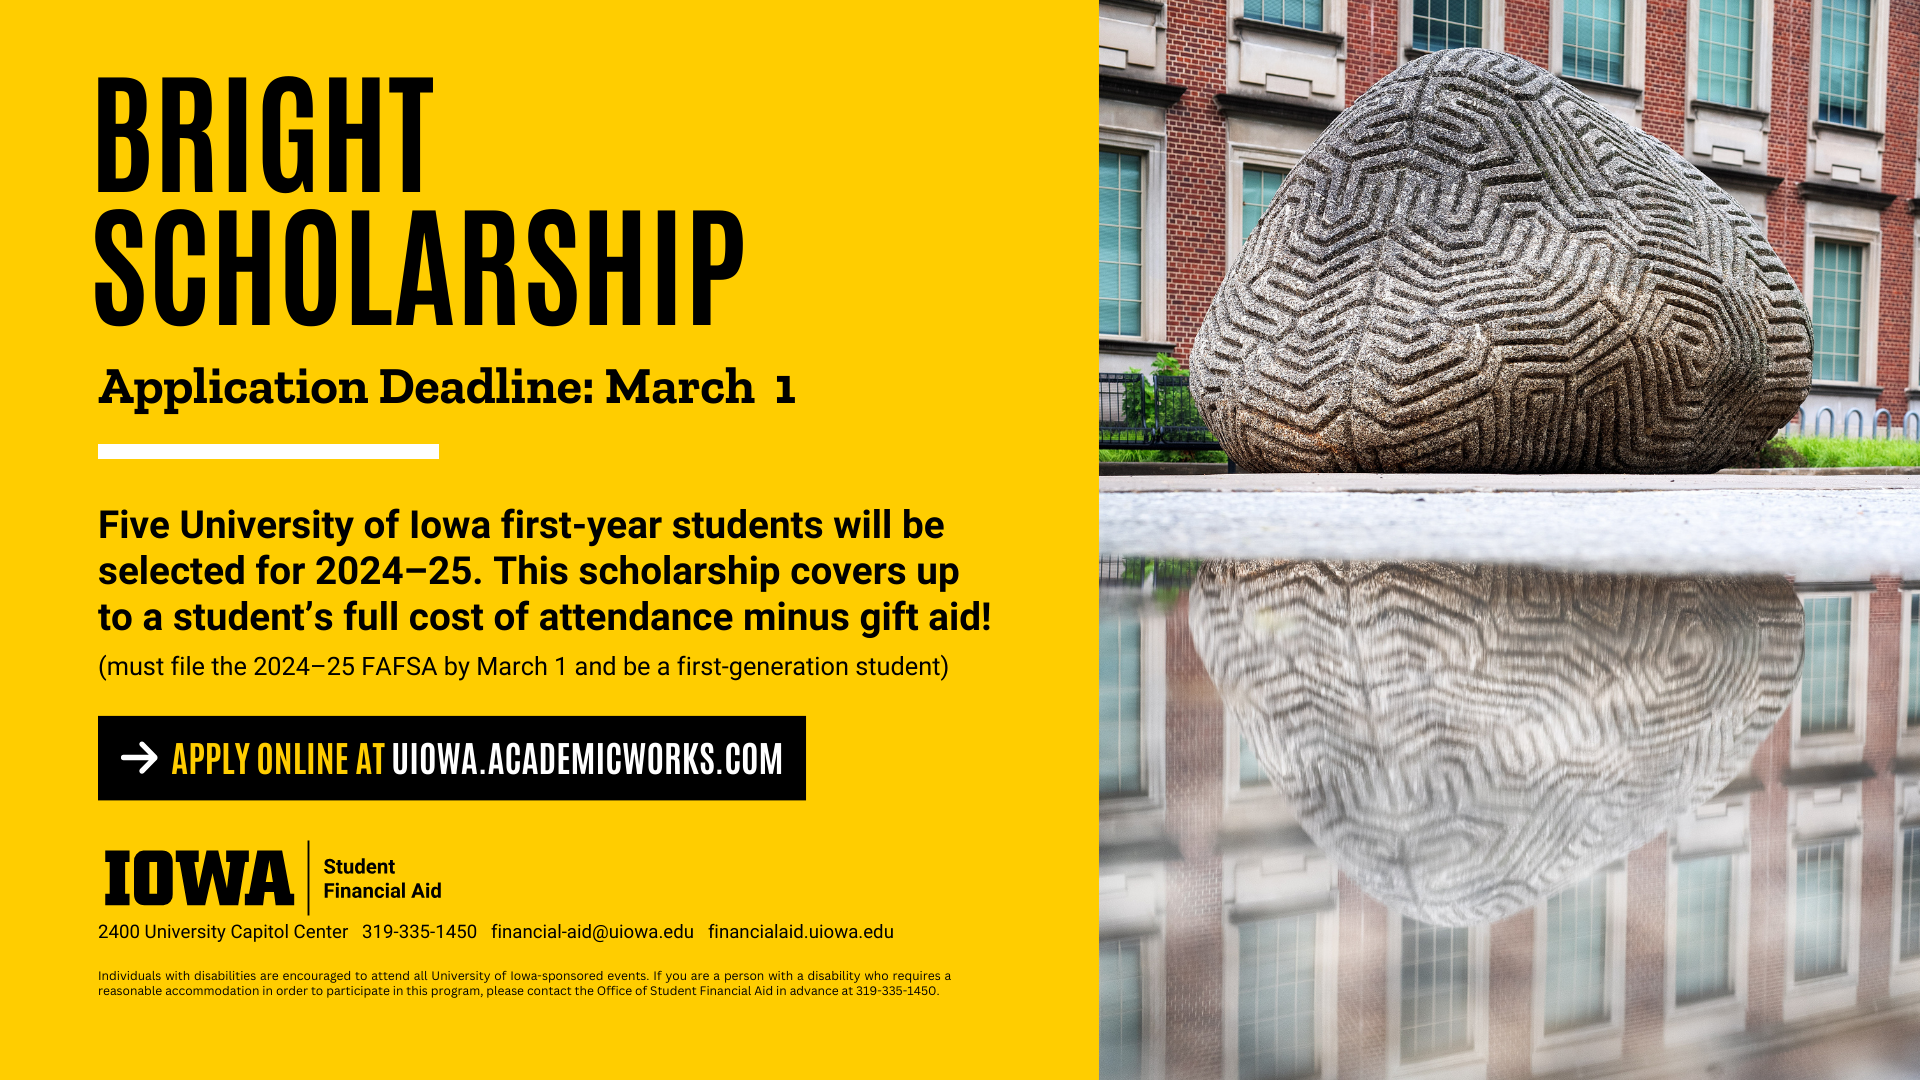 Bright Scholarship Application deadline is March 1. Apply at uiowa.academicworks.com